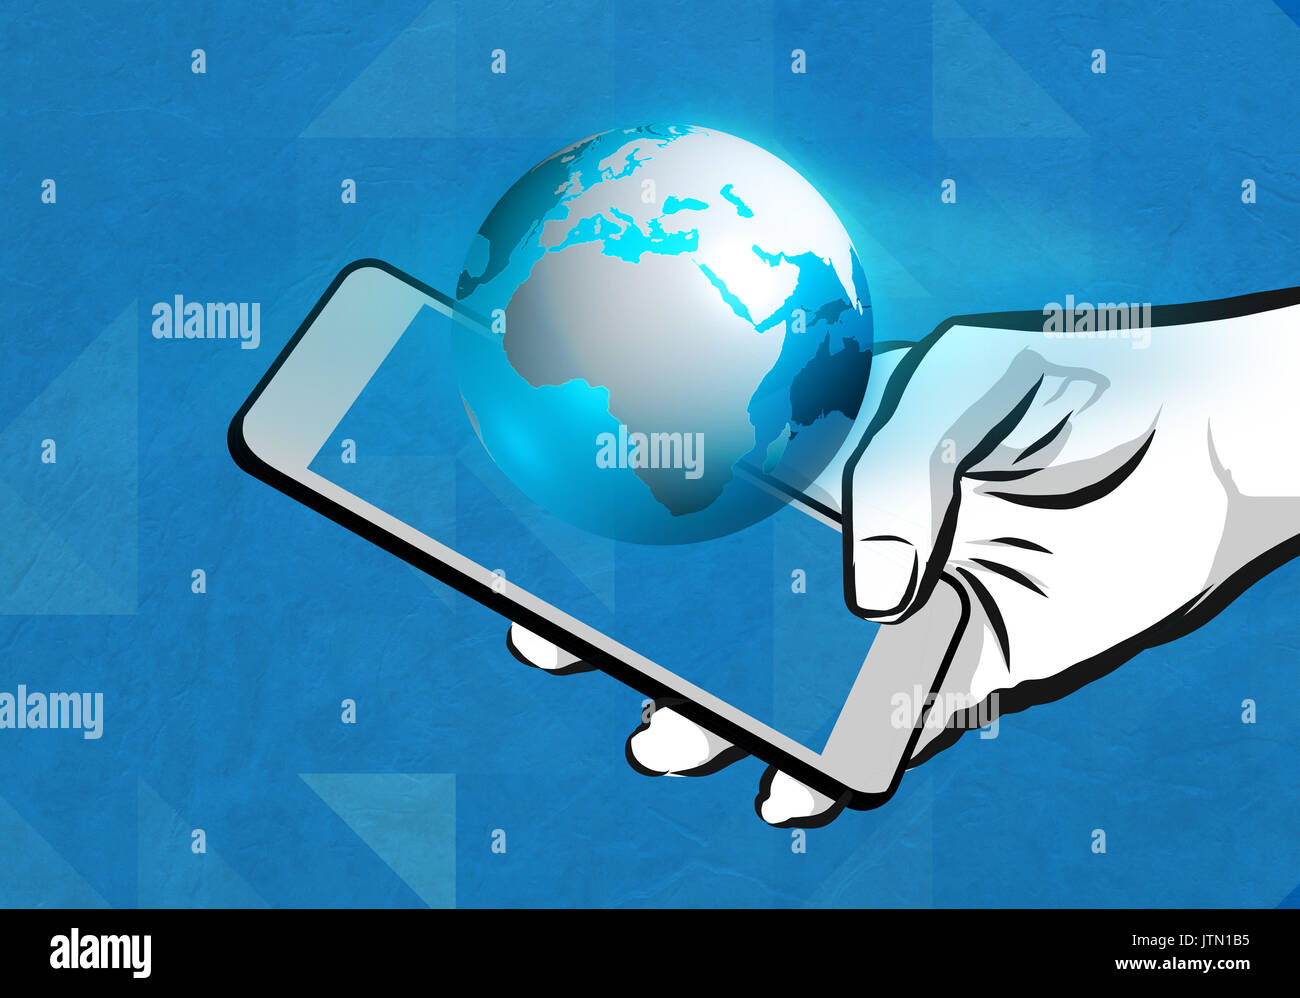 Wireless communication technology illustration with mobile phone and blue earth globe in foreground Stock Photo